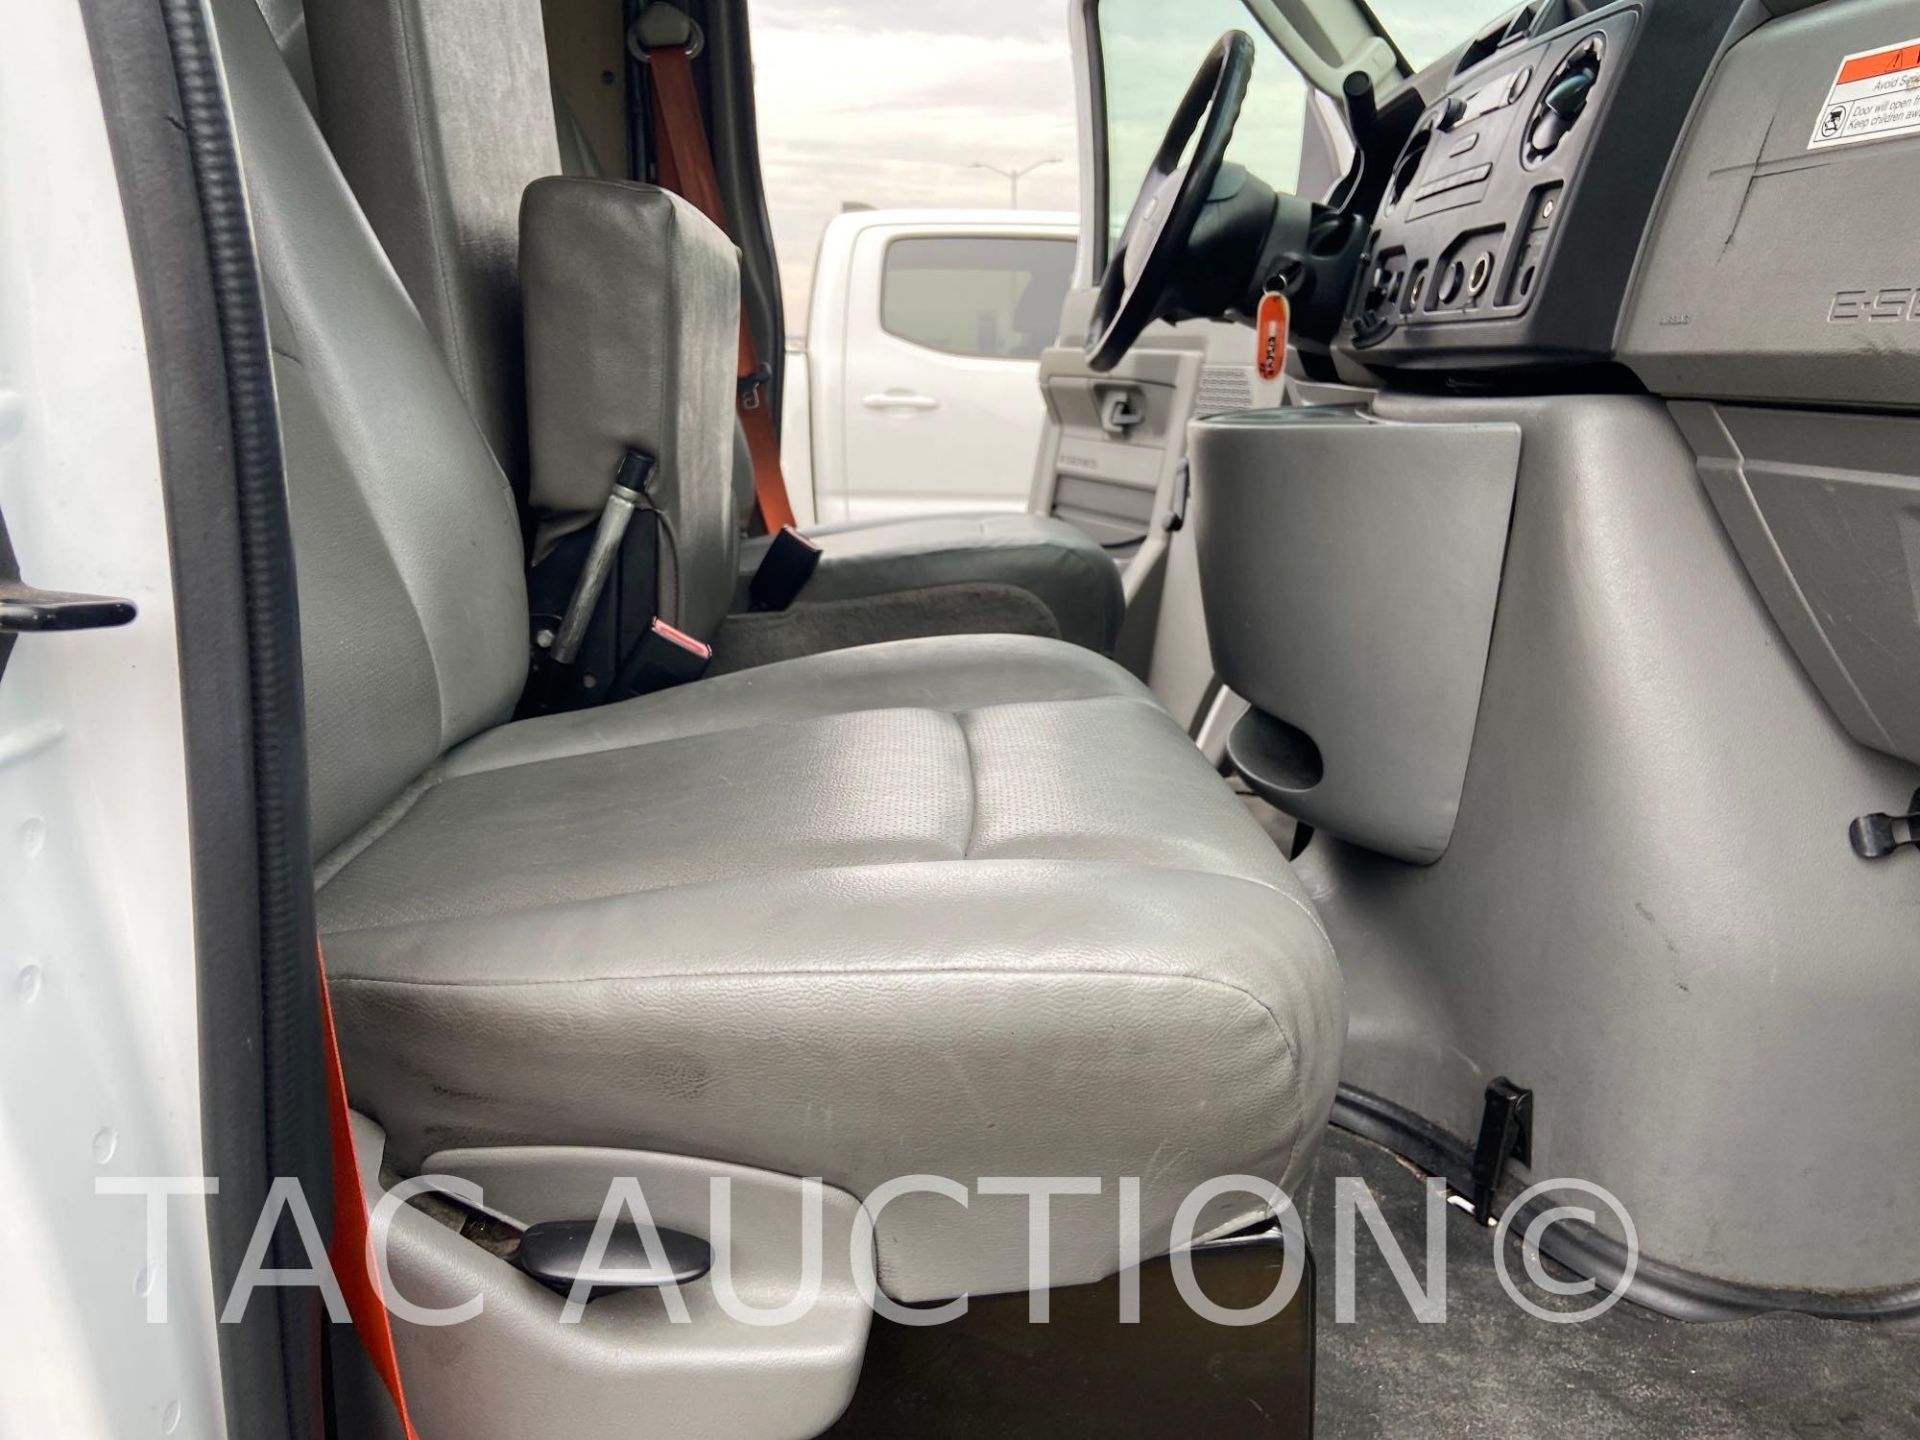 2015 Ford E-350 12ft Box Truck - Image 30 of 70